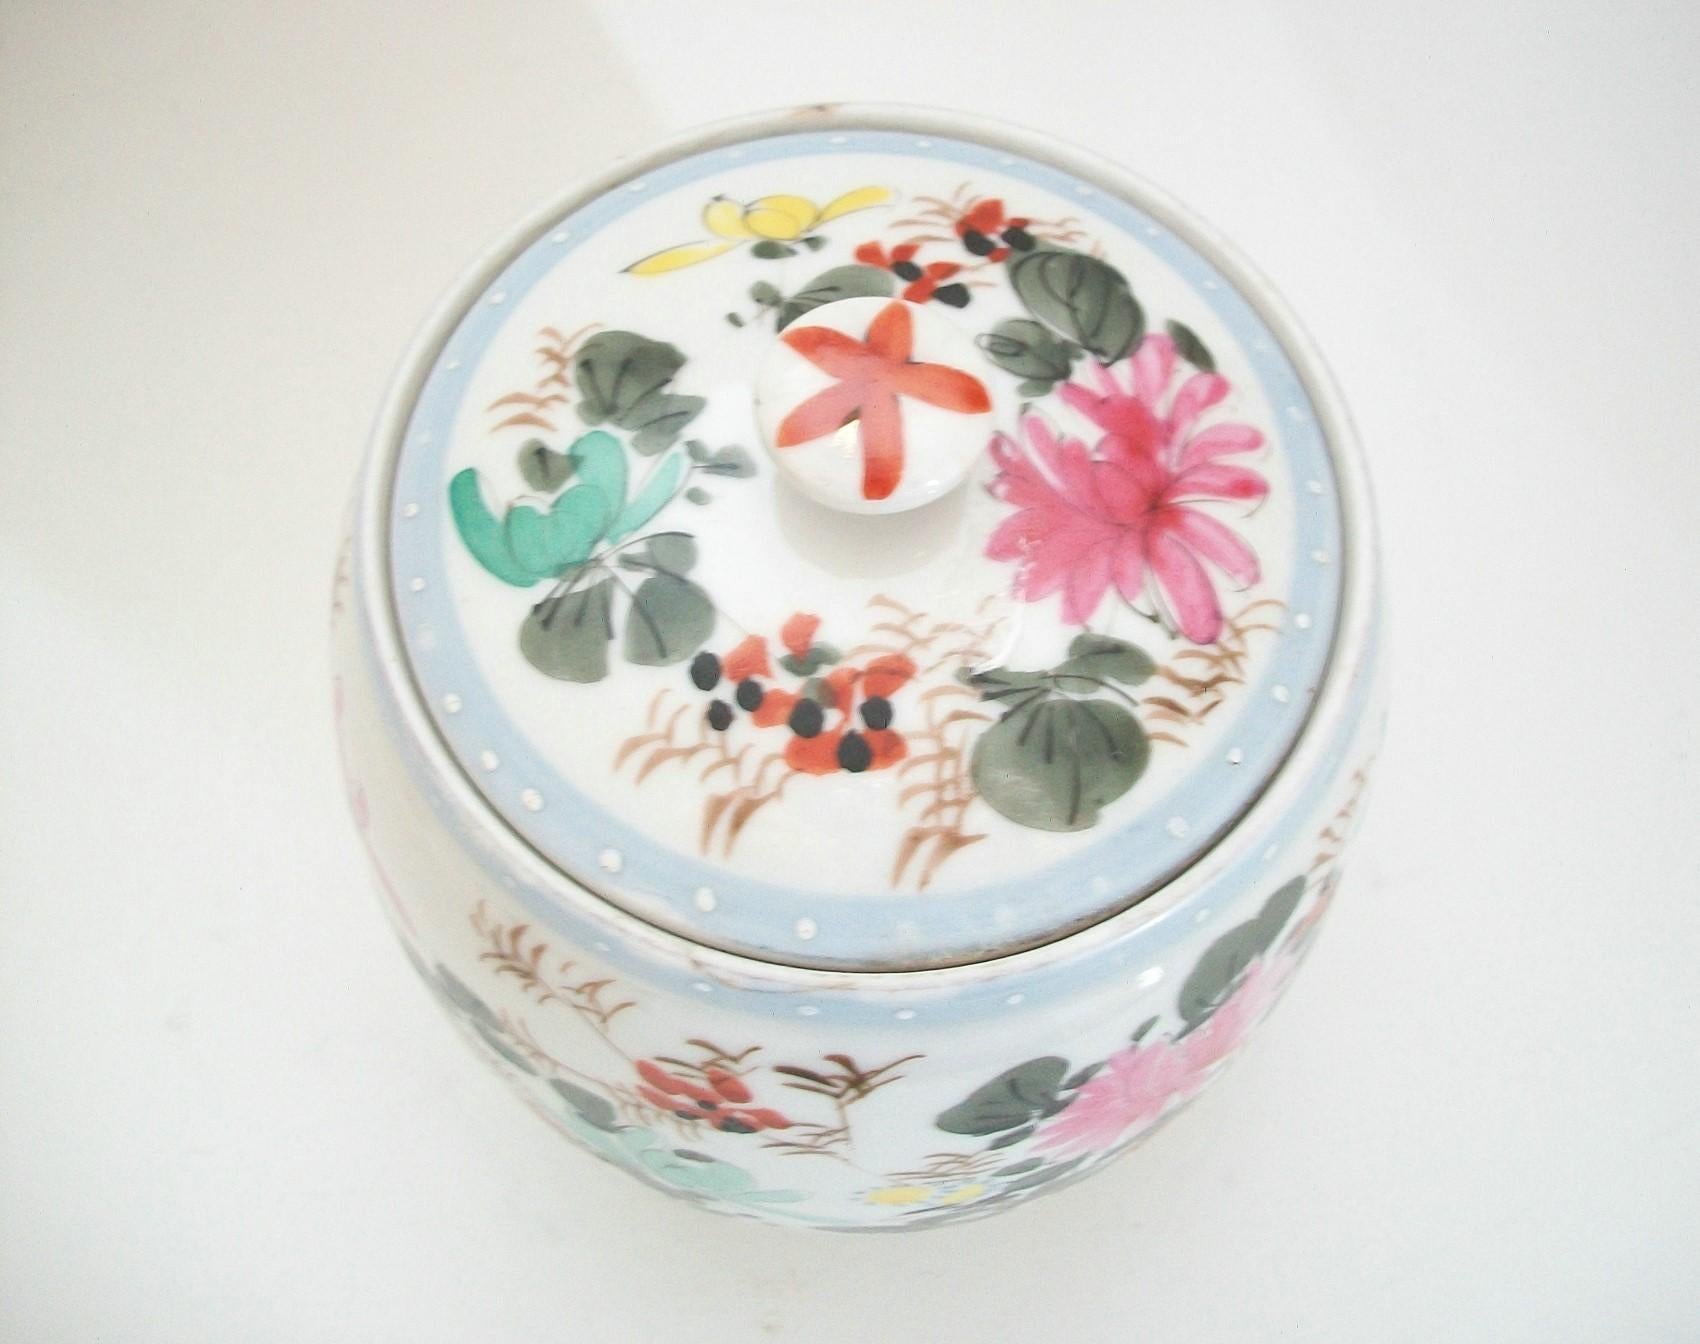 Antique Meiji Wucai Style Porcelain Jar & Cover, Japan, Early 20th Century For Sale 2